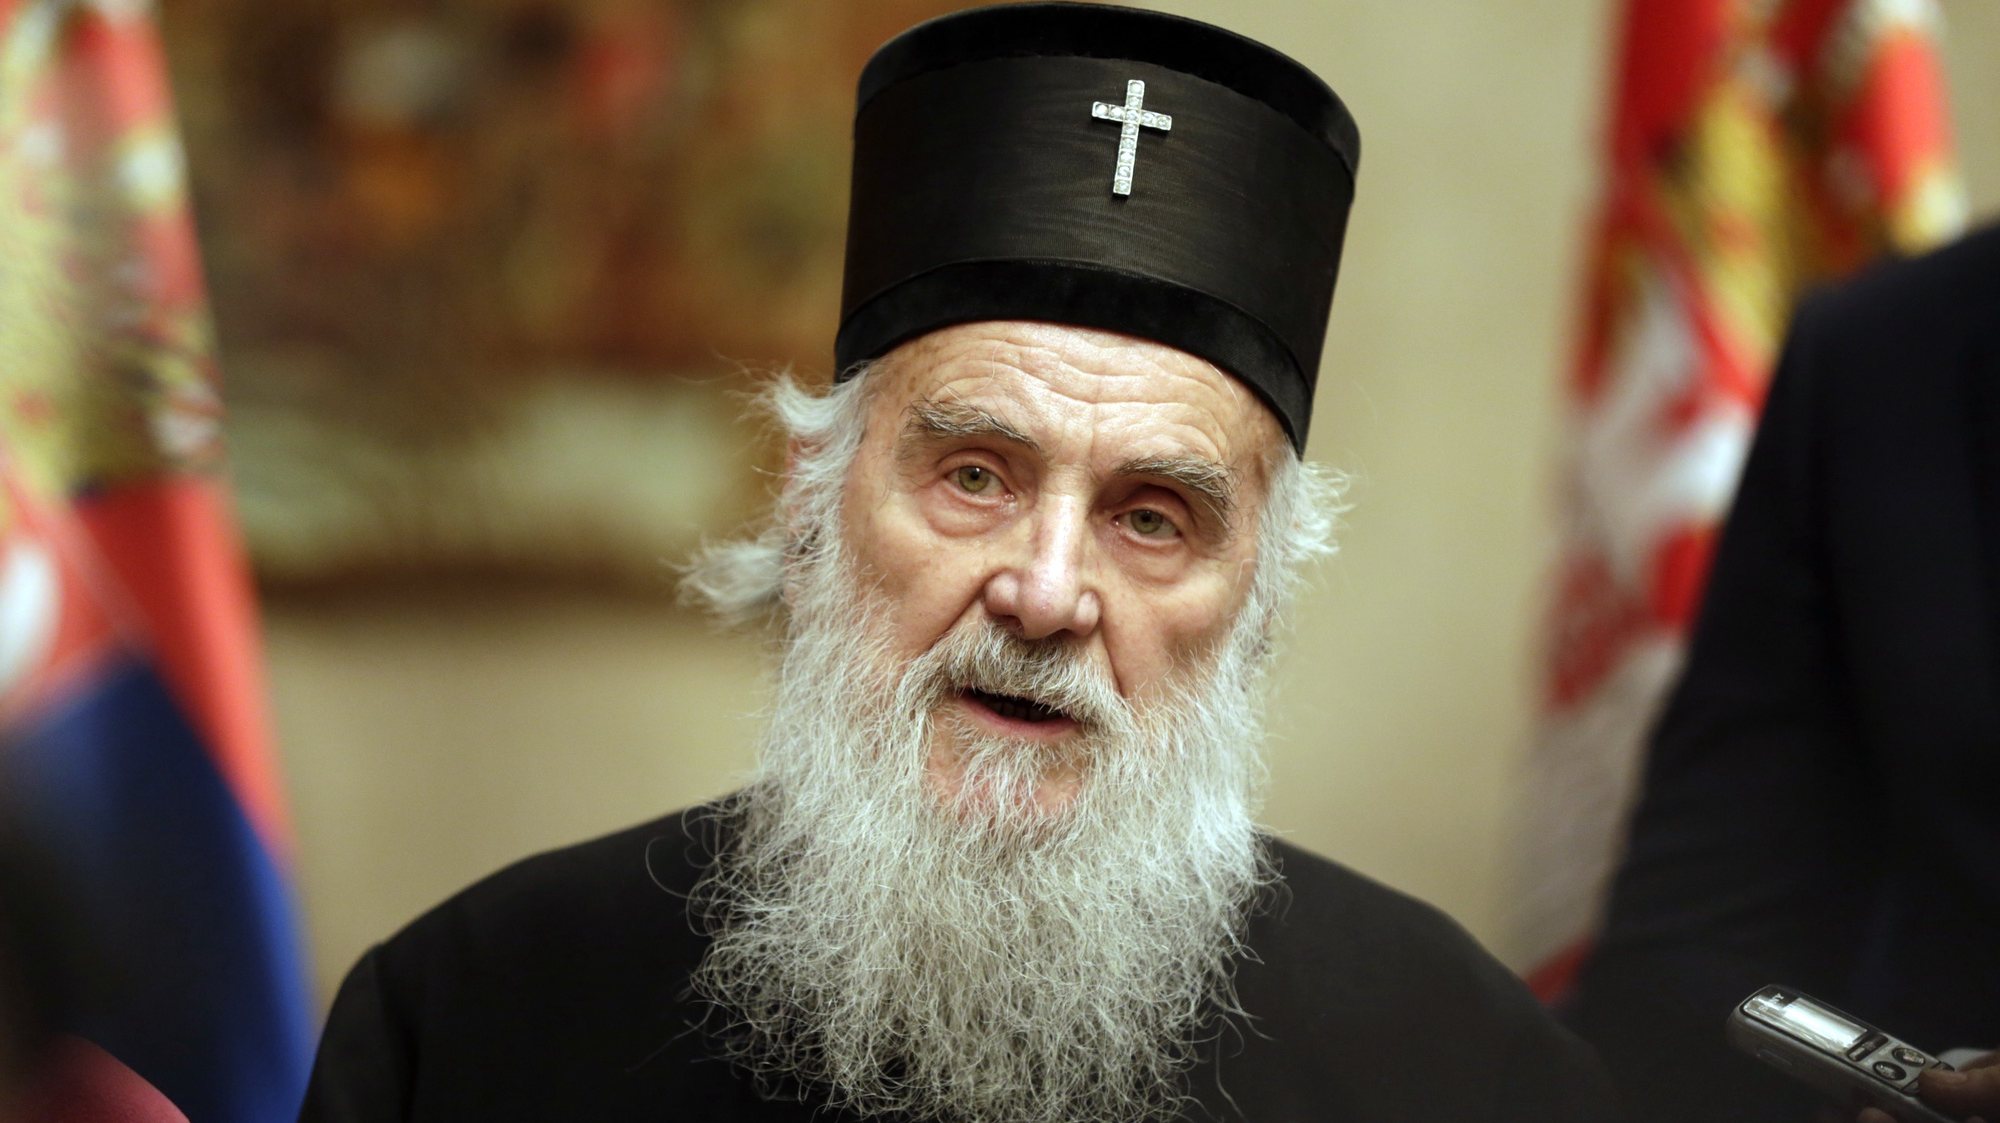 epa08830328 (FILE) - Serbian Orthodox Church Patriarch Irinej talks to members of the media in Belgrade, Serbia, 15 March 2020 (reissued 20 November 2020). According to media reports Patriarch Irinej died on 20 November 2020 in Belgrade, Serbia at the age of 90 after being admitted to a hospital for having symptoms of Covid-19 disease.  EPA/ANDREJ CUKIC